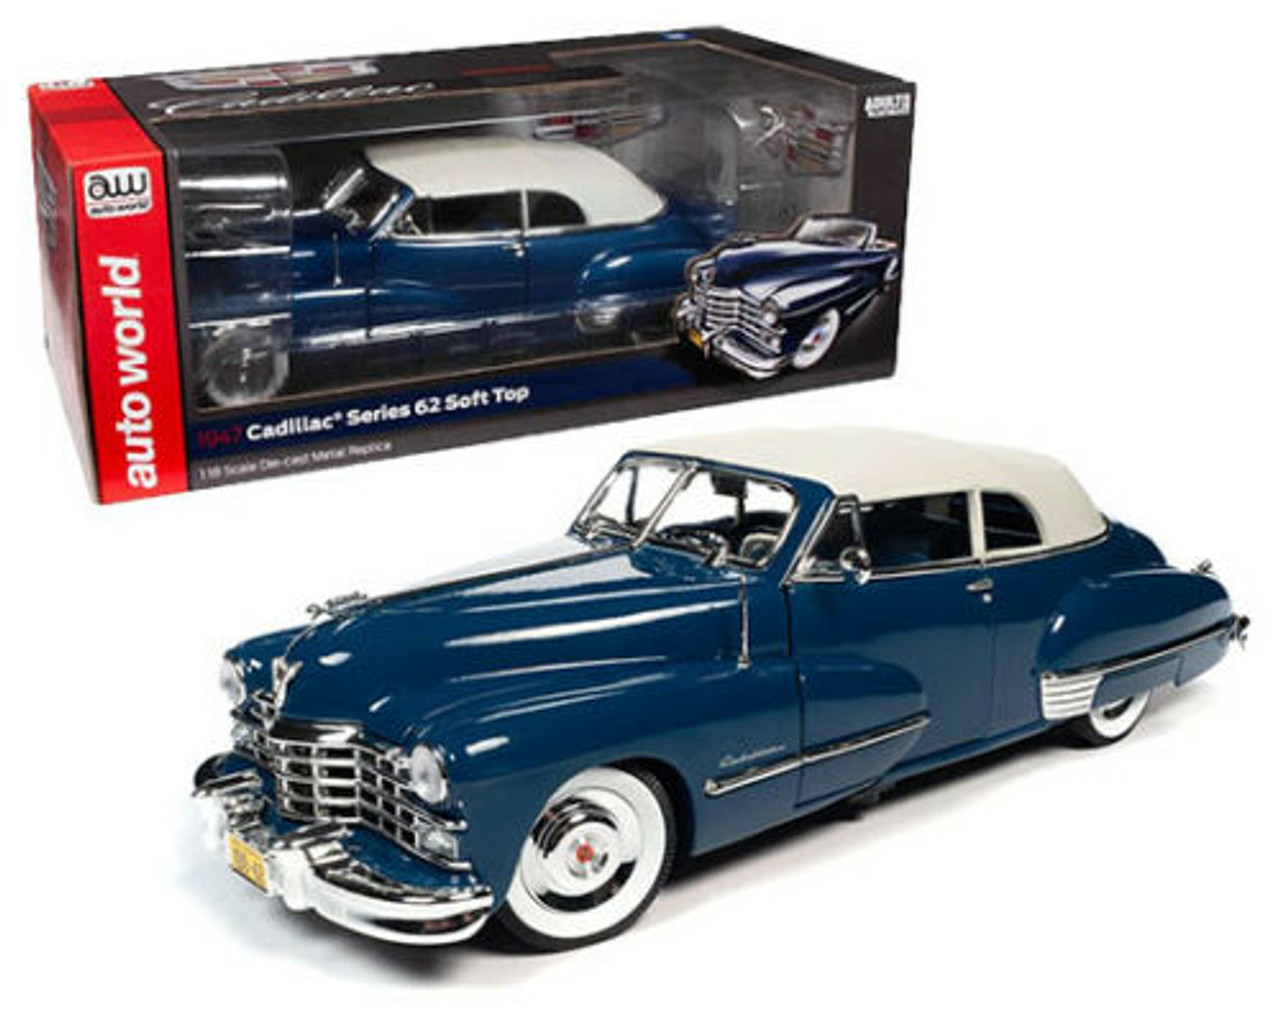 1/18 Auto World 1947 Cadillac Series 62 Soft Top (Beldon Blue with Tan Top) Diecast Car Model